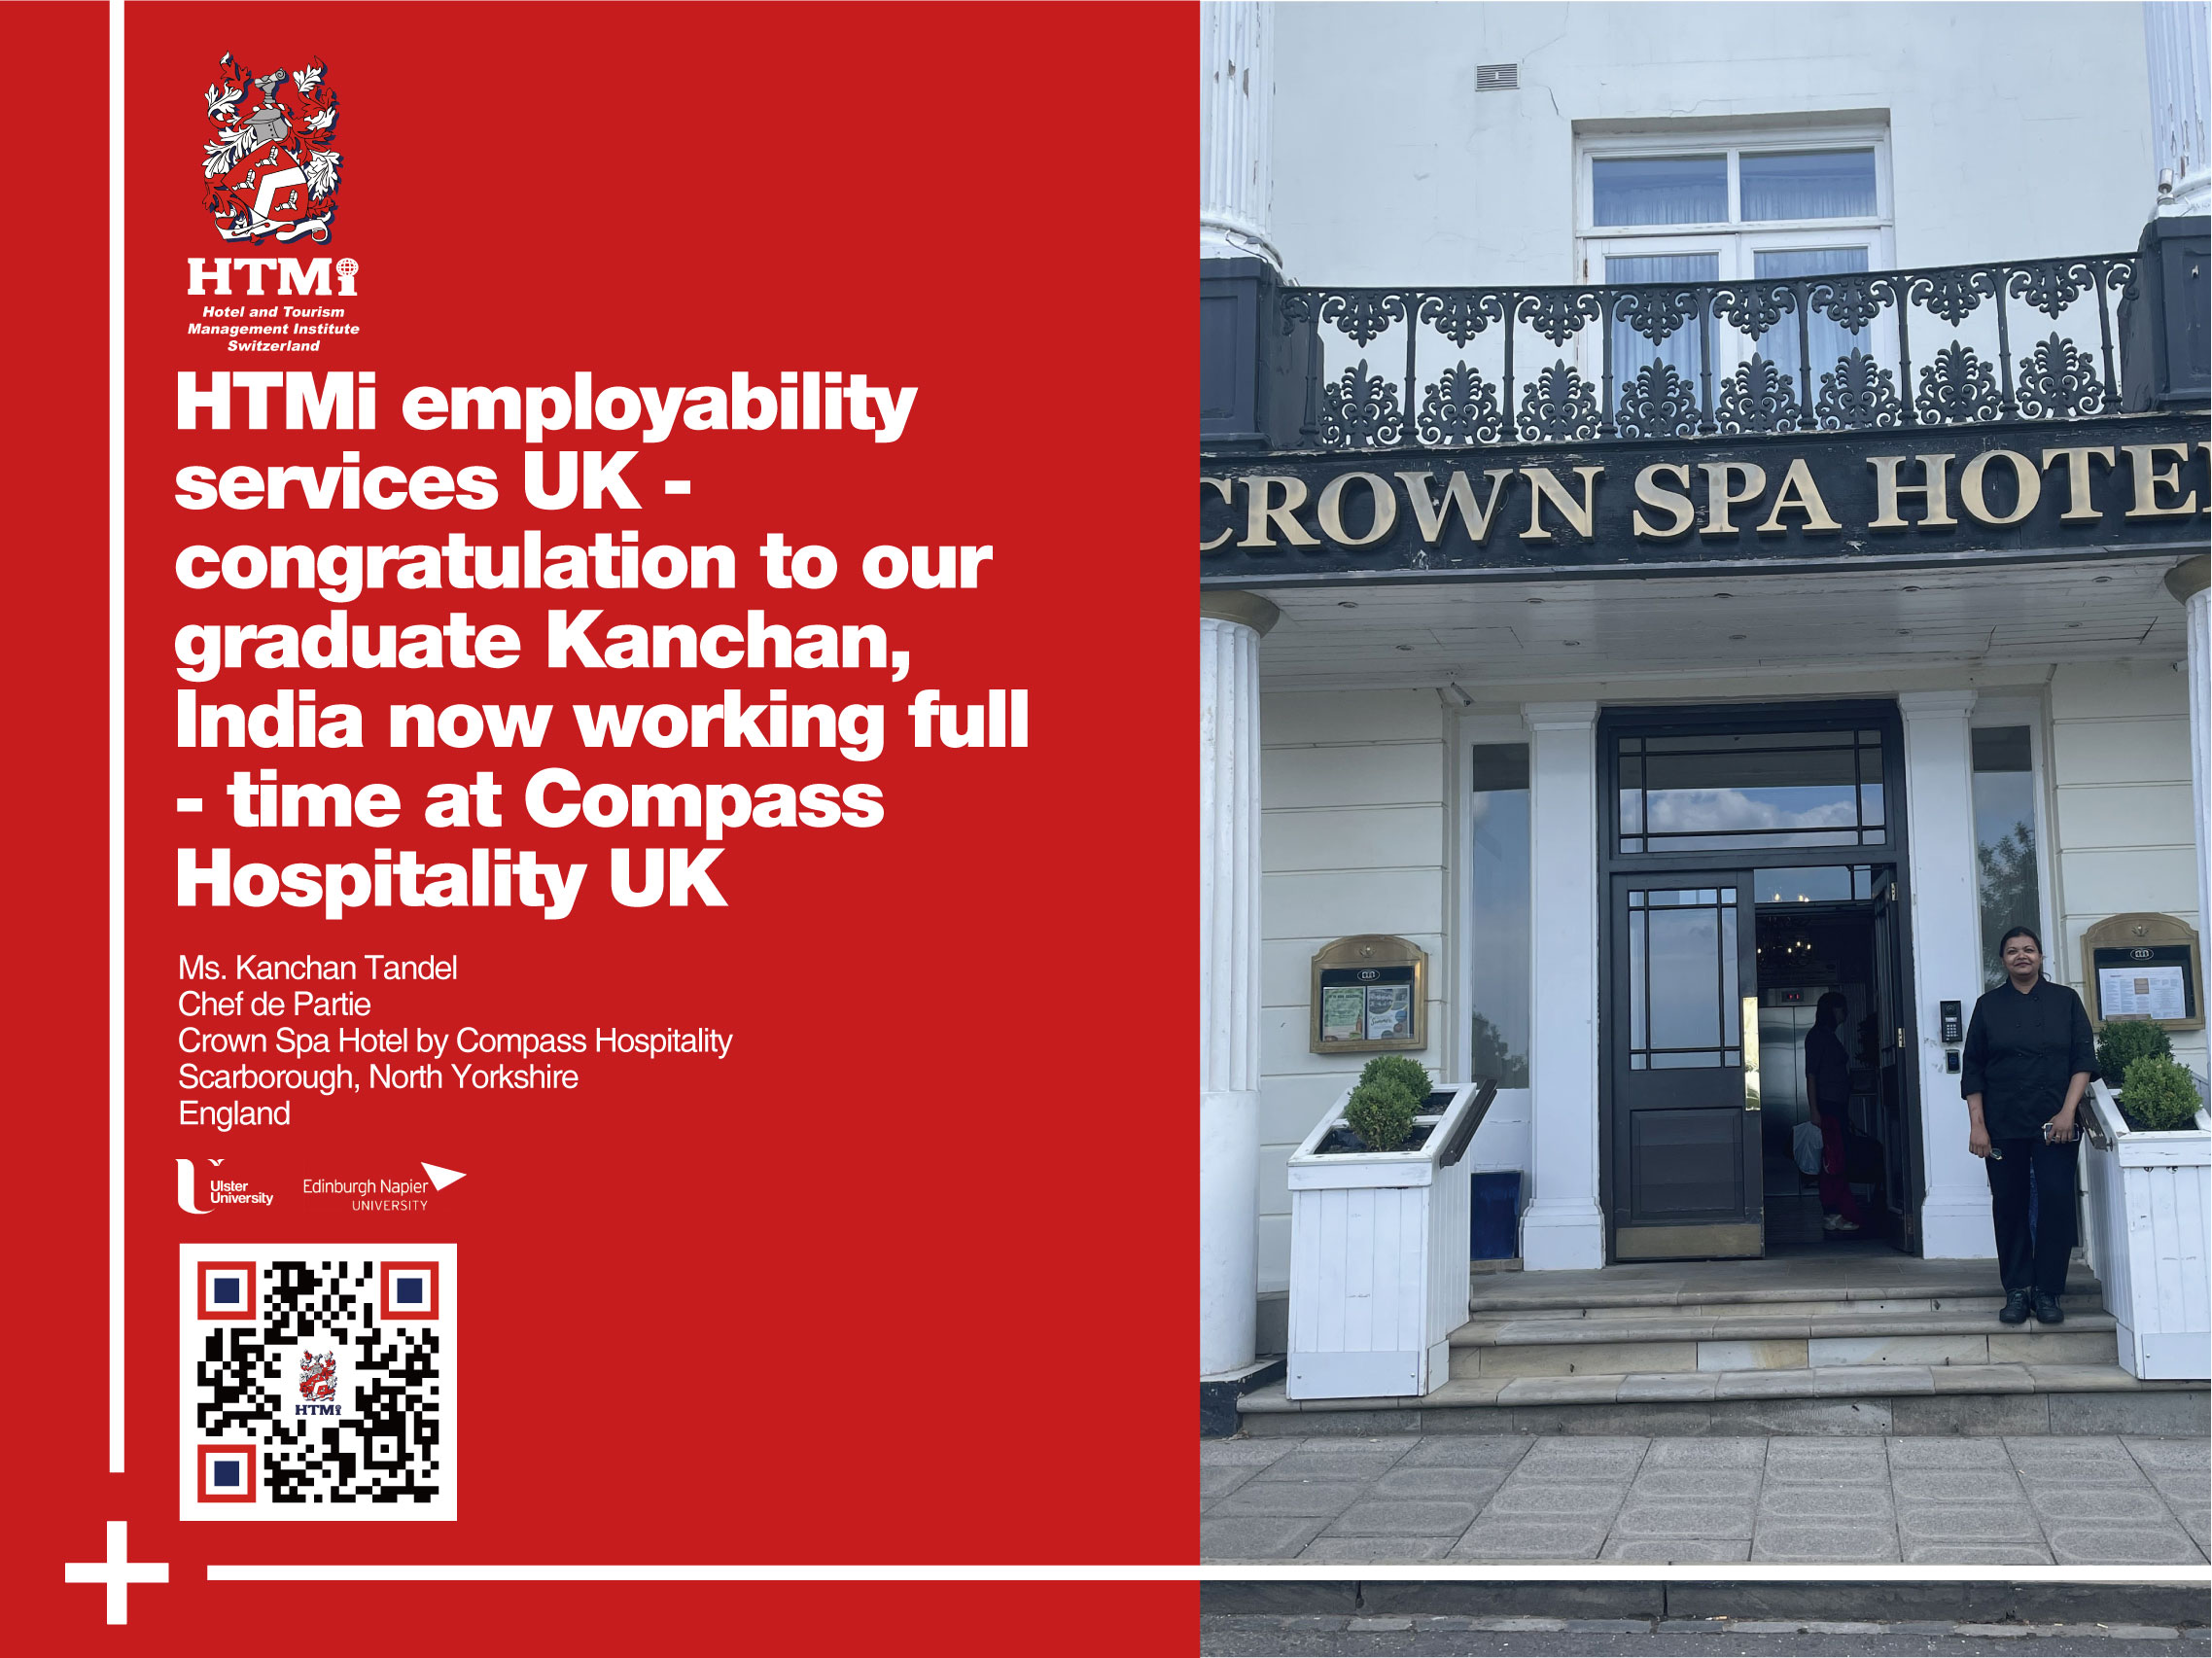 HTMi employability services UK - congratulations to our graduate Kanchan, India now working full-time at Compass Hospitality UK